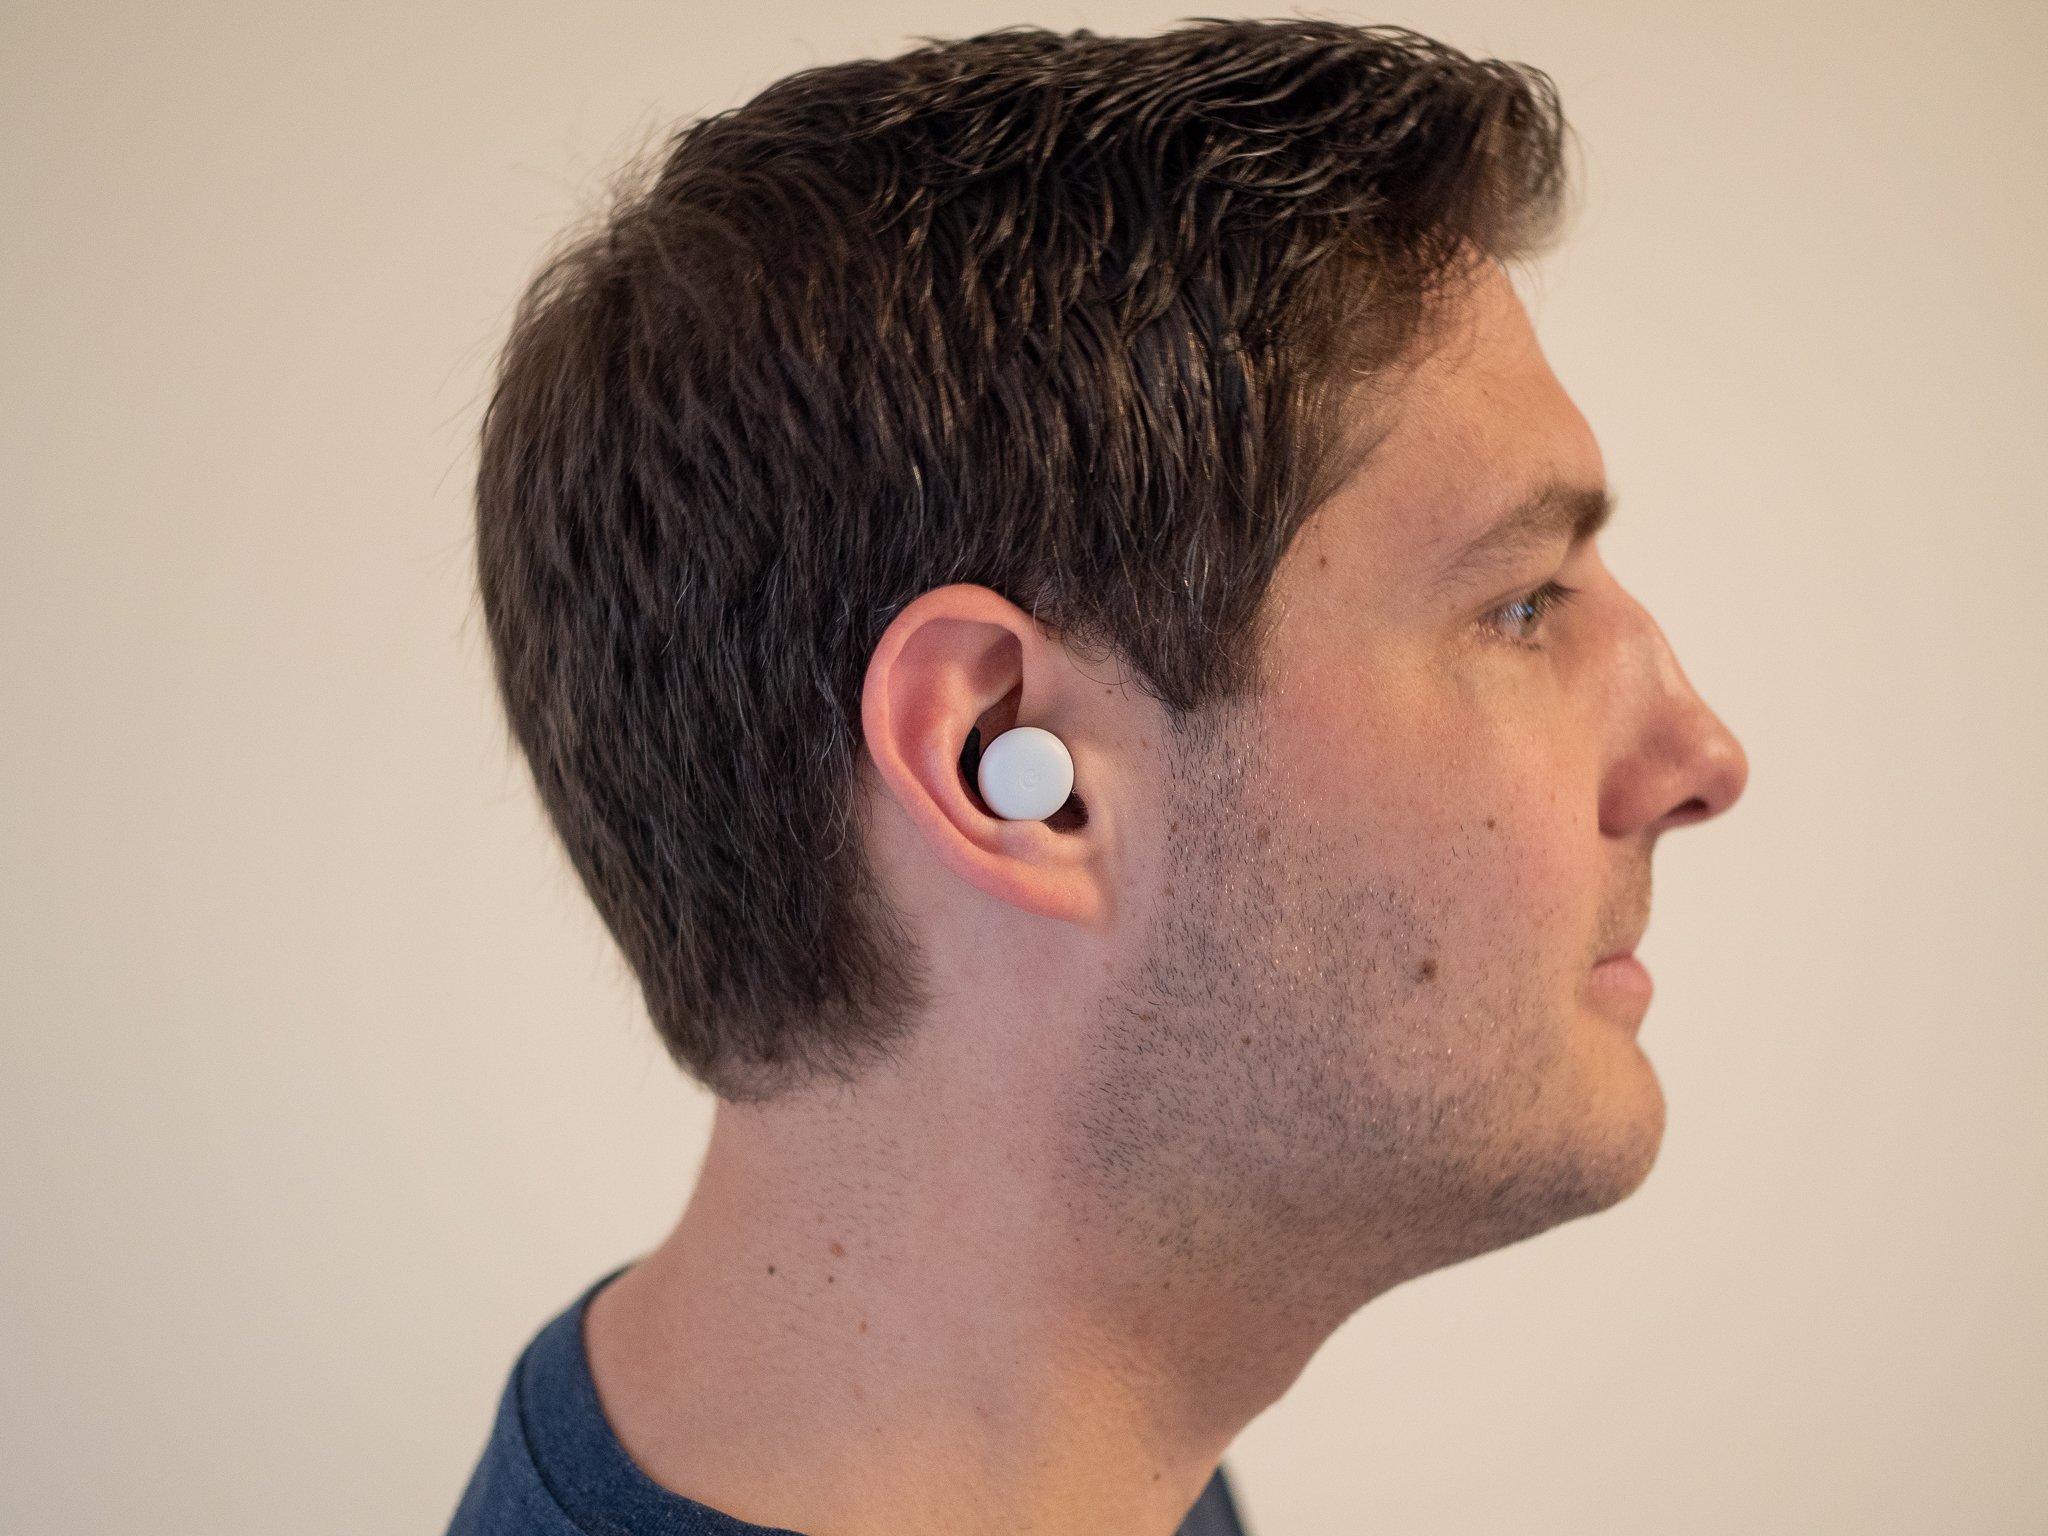 Google Pixel Buds 2020 review: These AirPods competitors were worth the